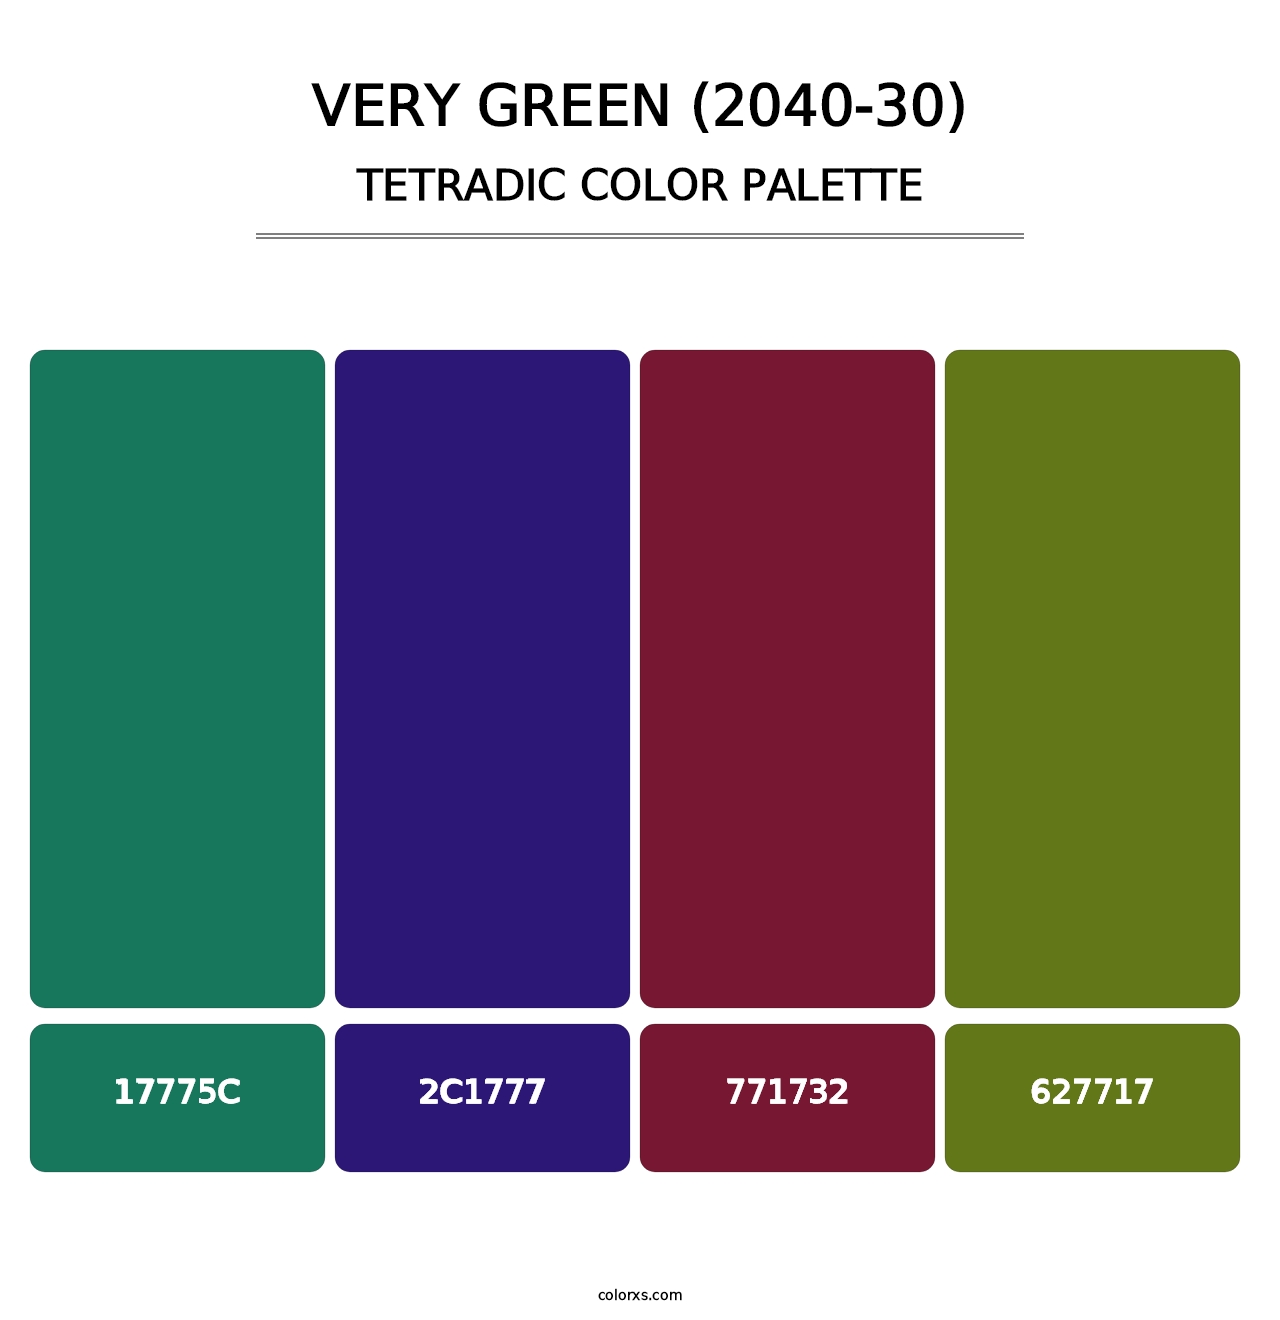 Very Green (2040-30) - Tetradic Color Palette